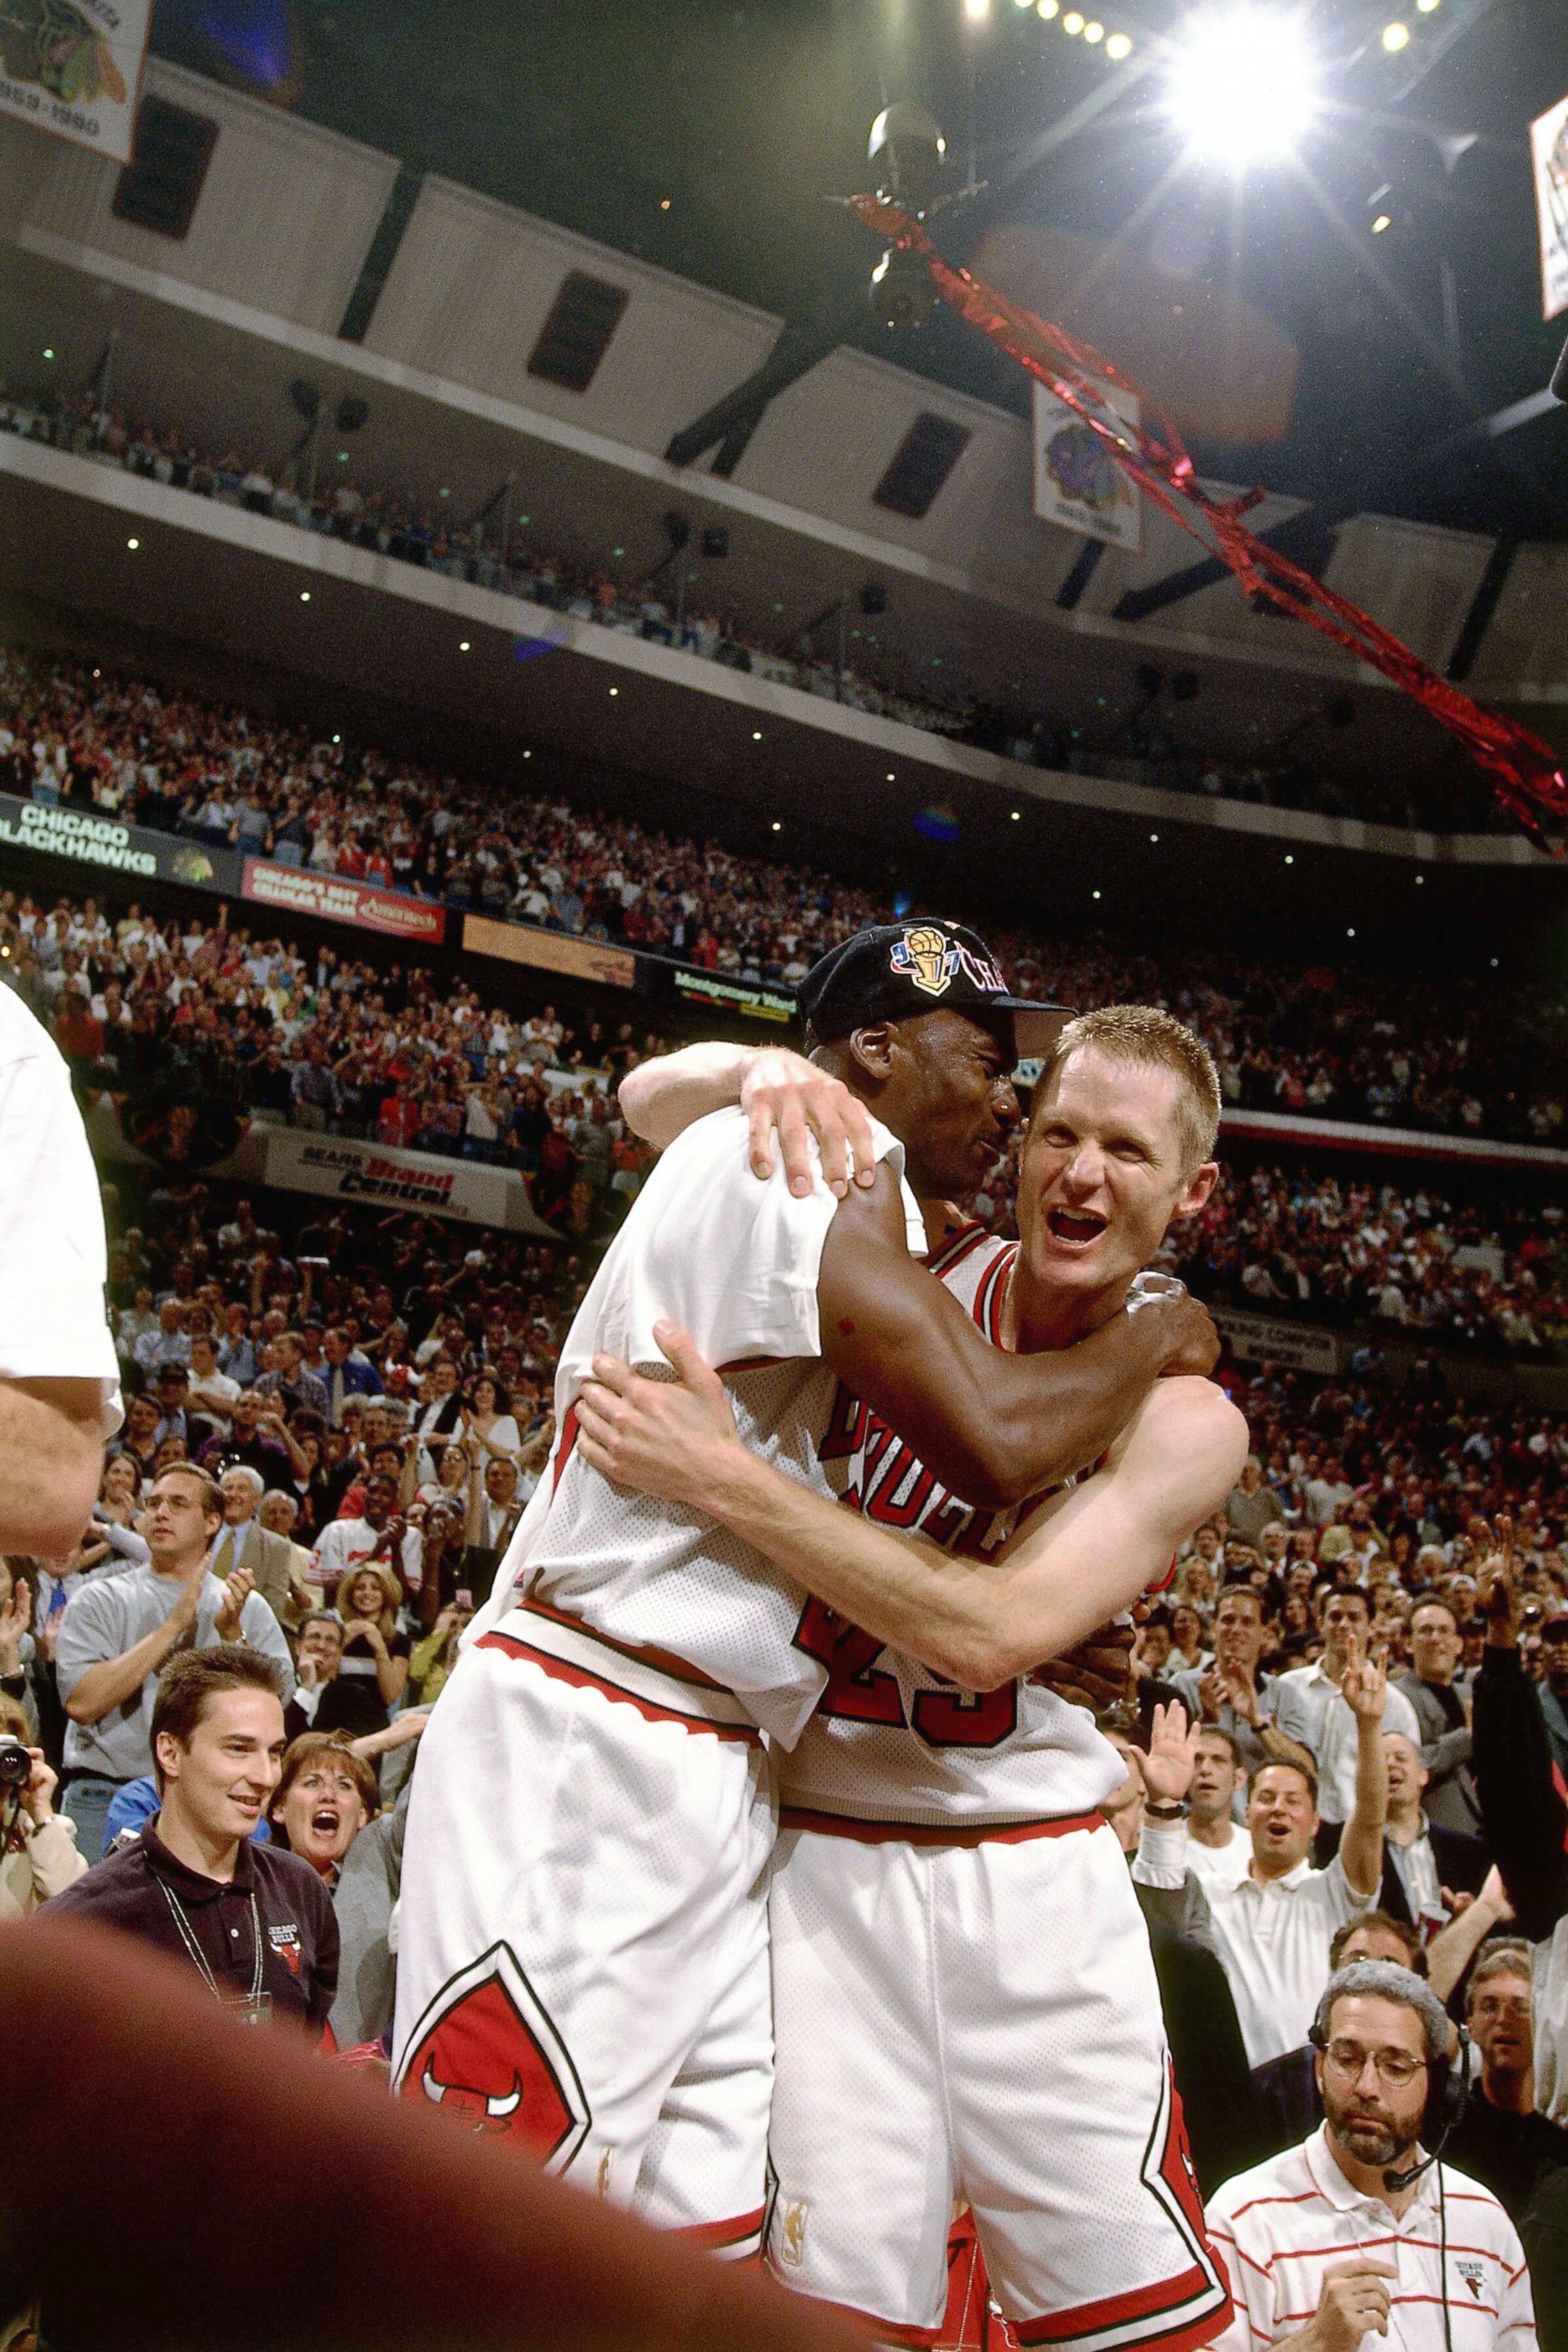 PHOTO: Steve Kerr and Michael Jordan of the Chicago Bulls celebrate after defeating the Utah Jazz to win the NBA Championship at the United Center in Chicago, 1997.